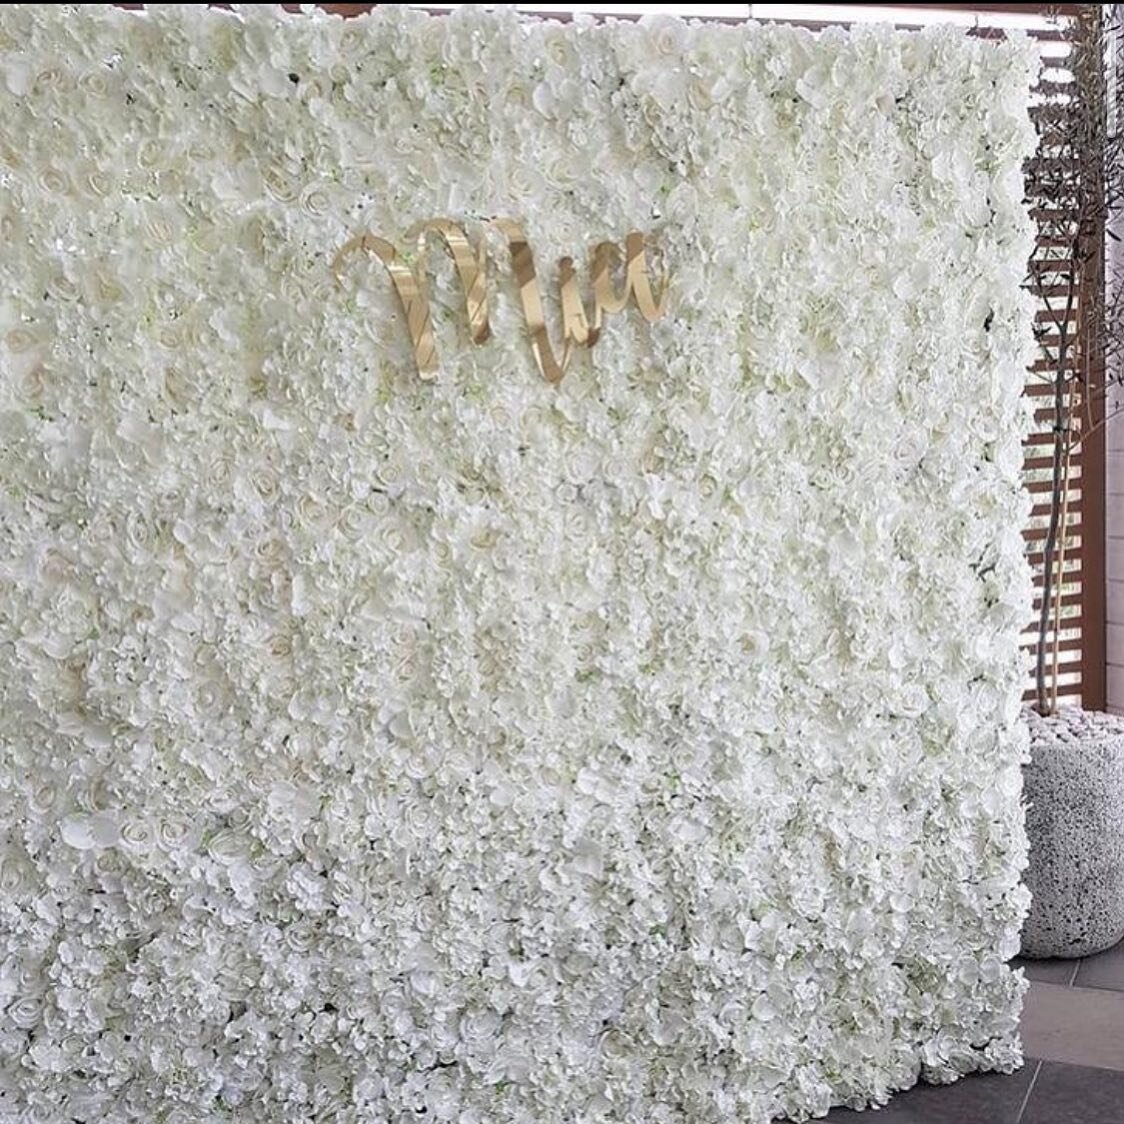 Our white floral wall is perfect for tour event. Contact us today!